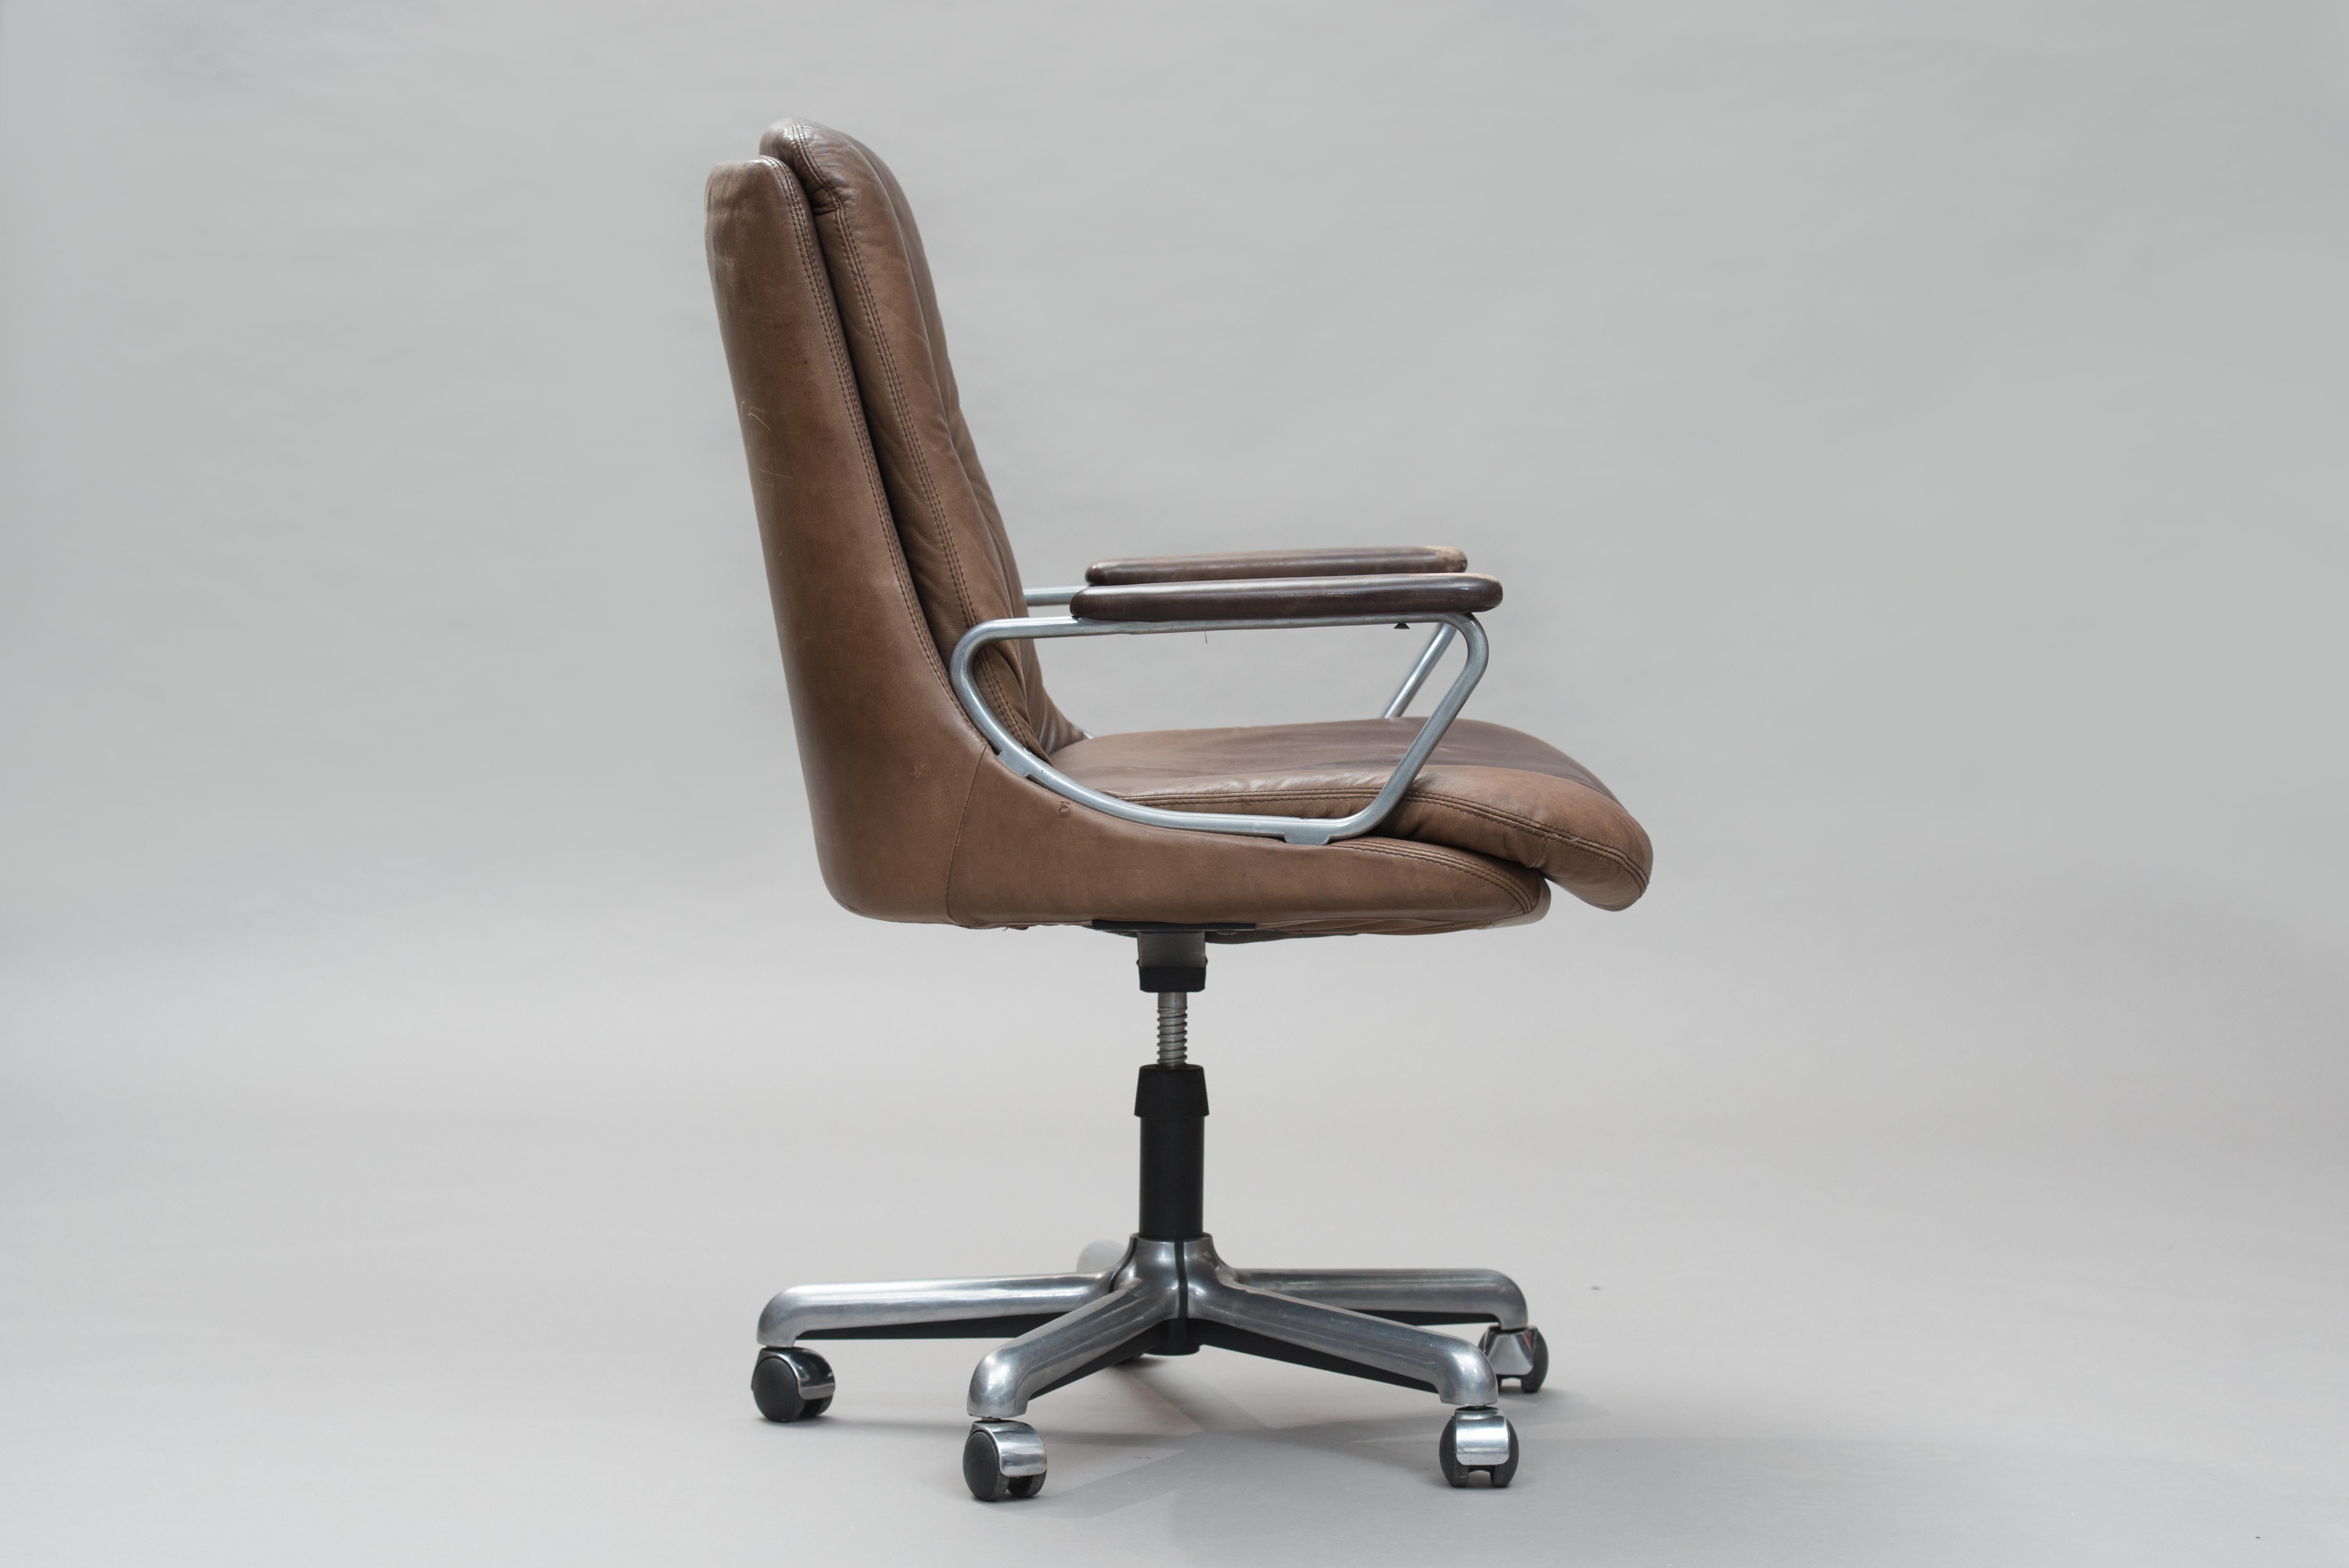 Italian Mid-Century Modern desk adjustable swivel chair.
Two units available.
This item is in original condition, can be sold as it is or fully restored, the price shown is in original condition.
     